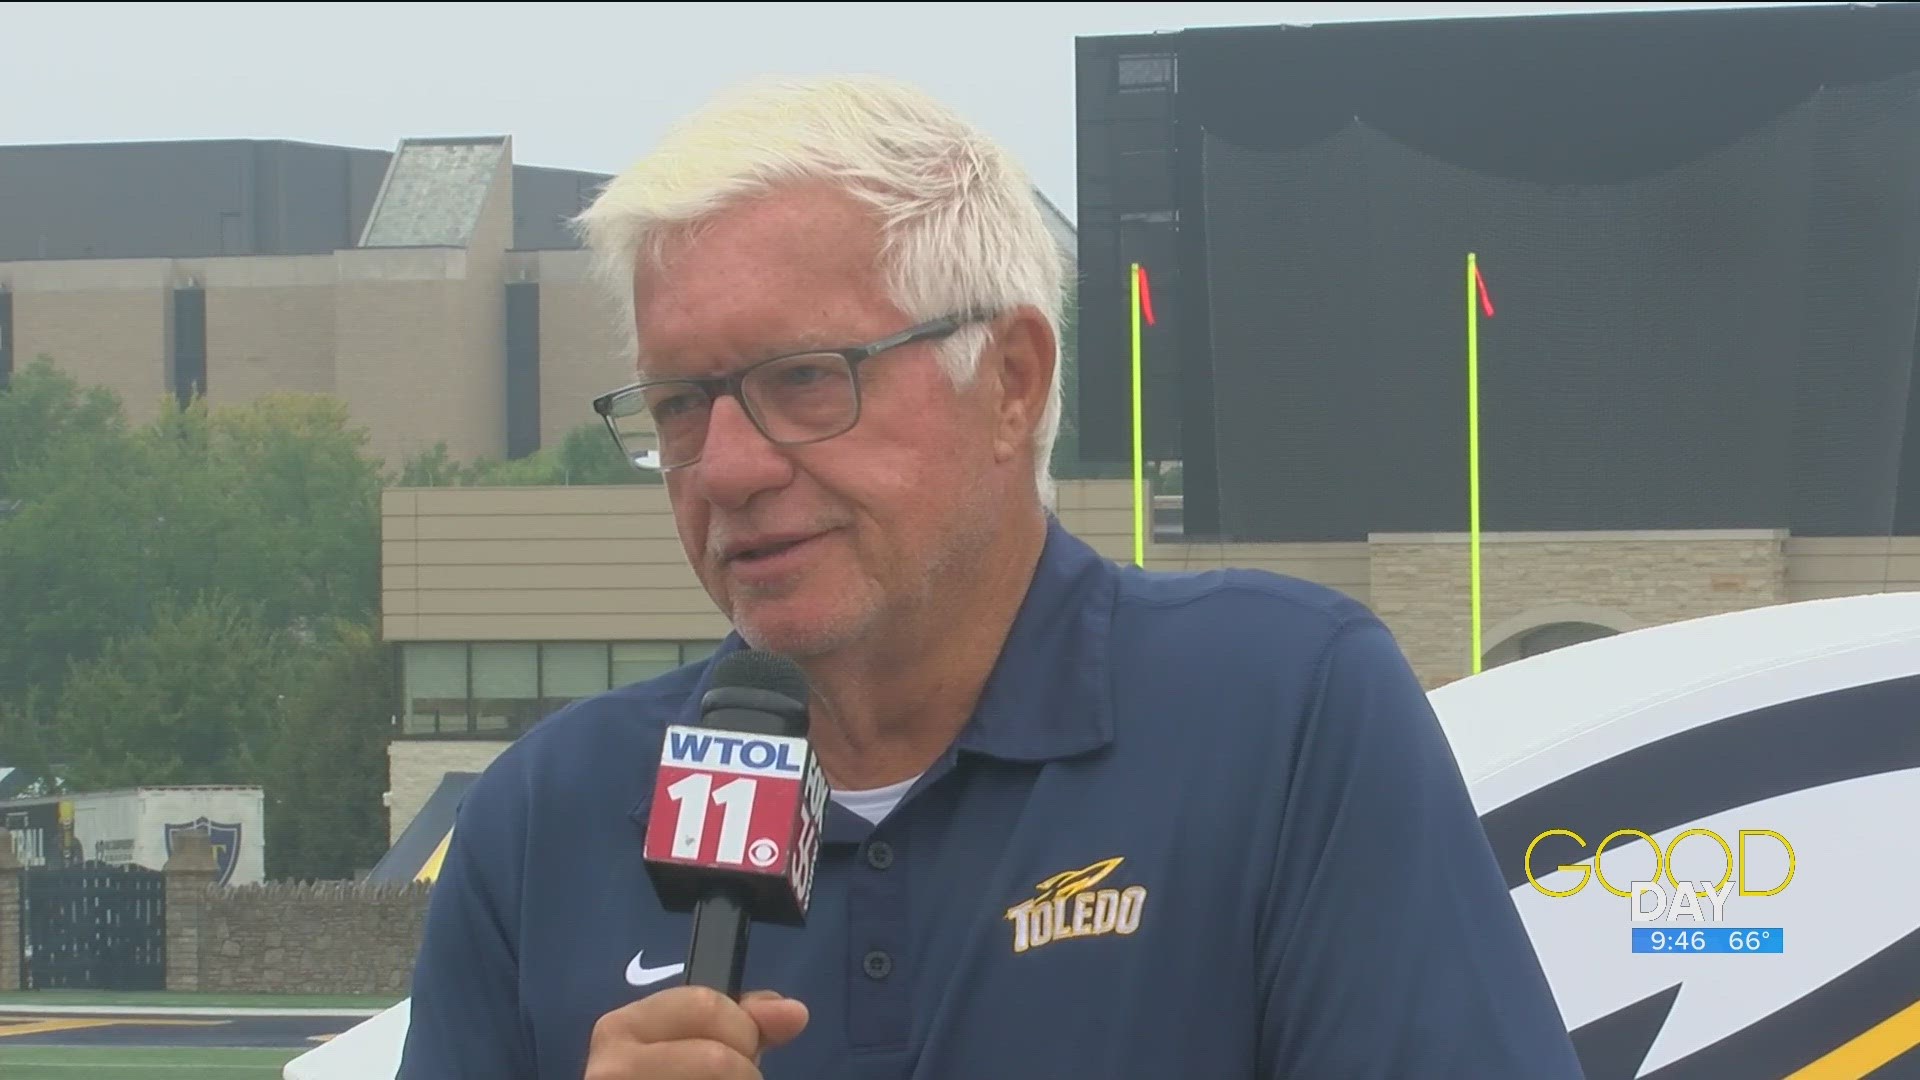 UToledo announcers Mark Beier and Kevin Mullan offer insights on how the game day process.